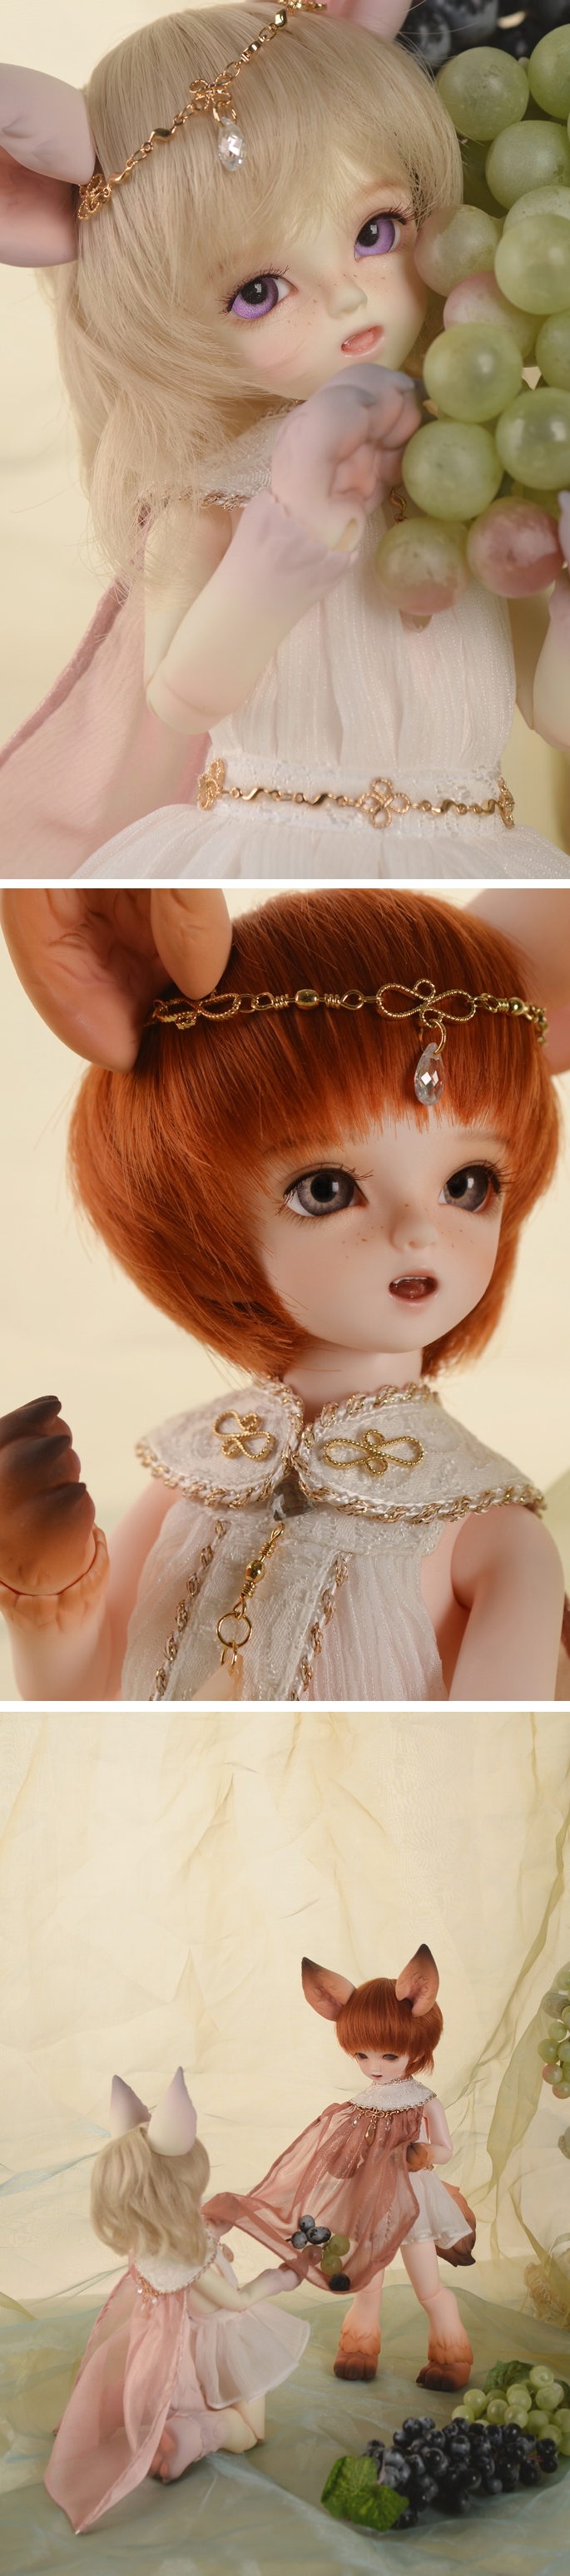 Feny & Necy  - The Fox and the Grapes bjd-4.jpg